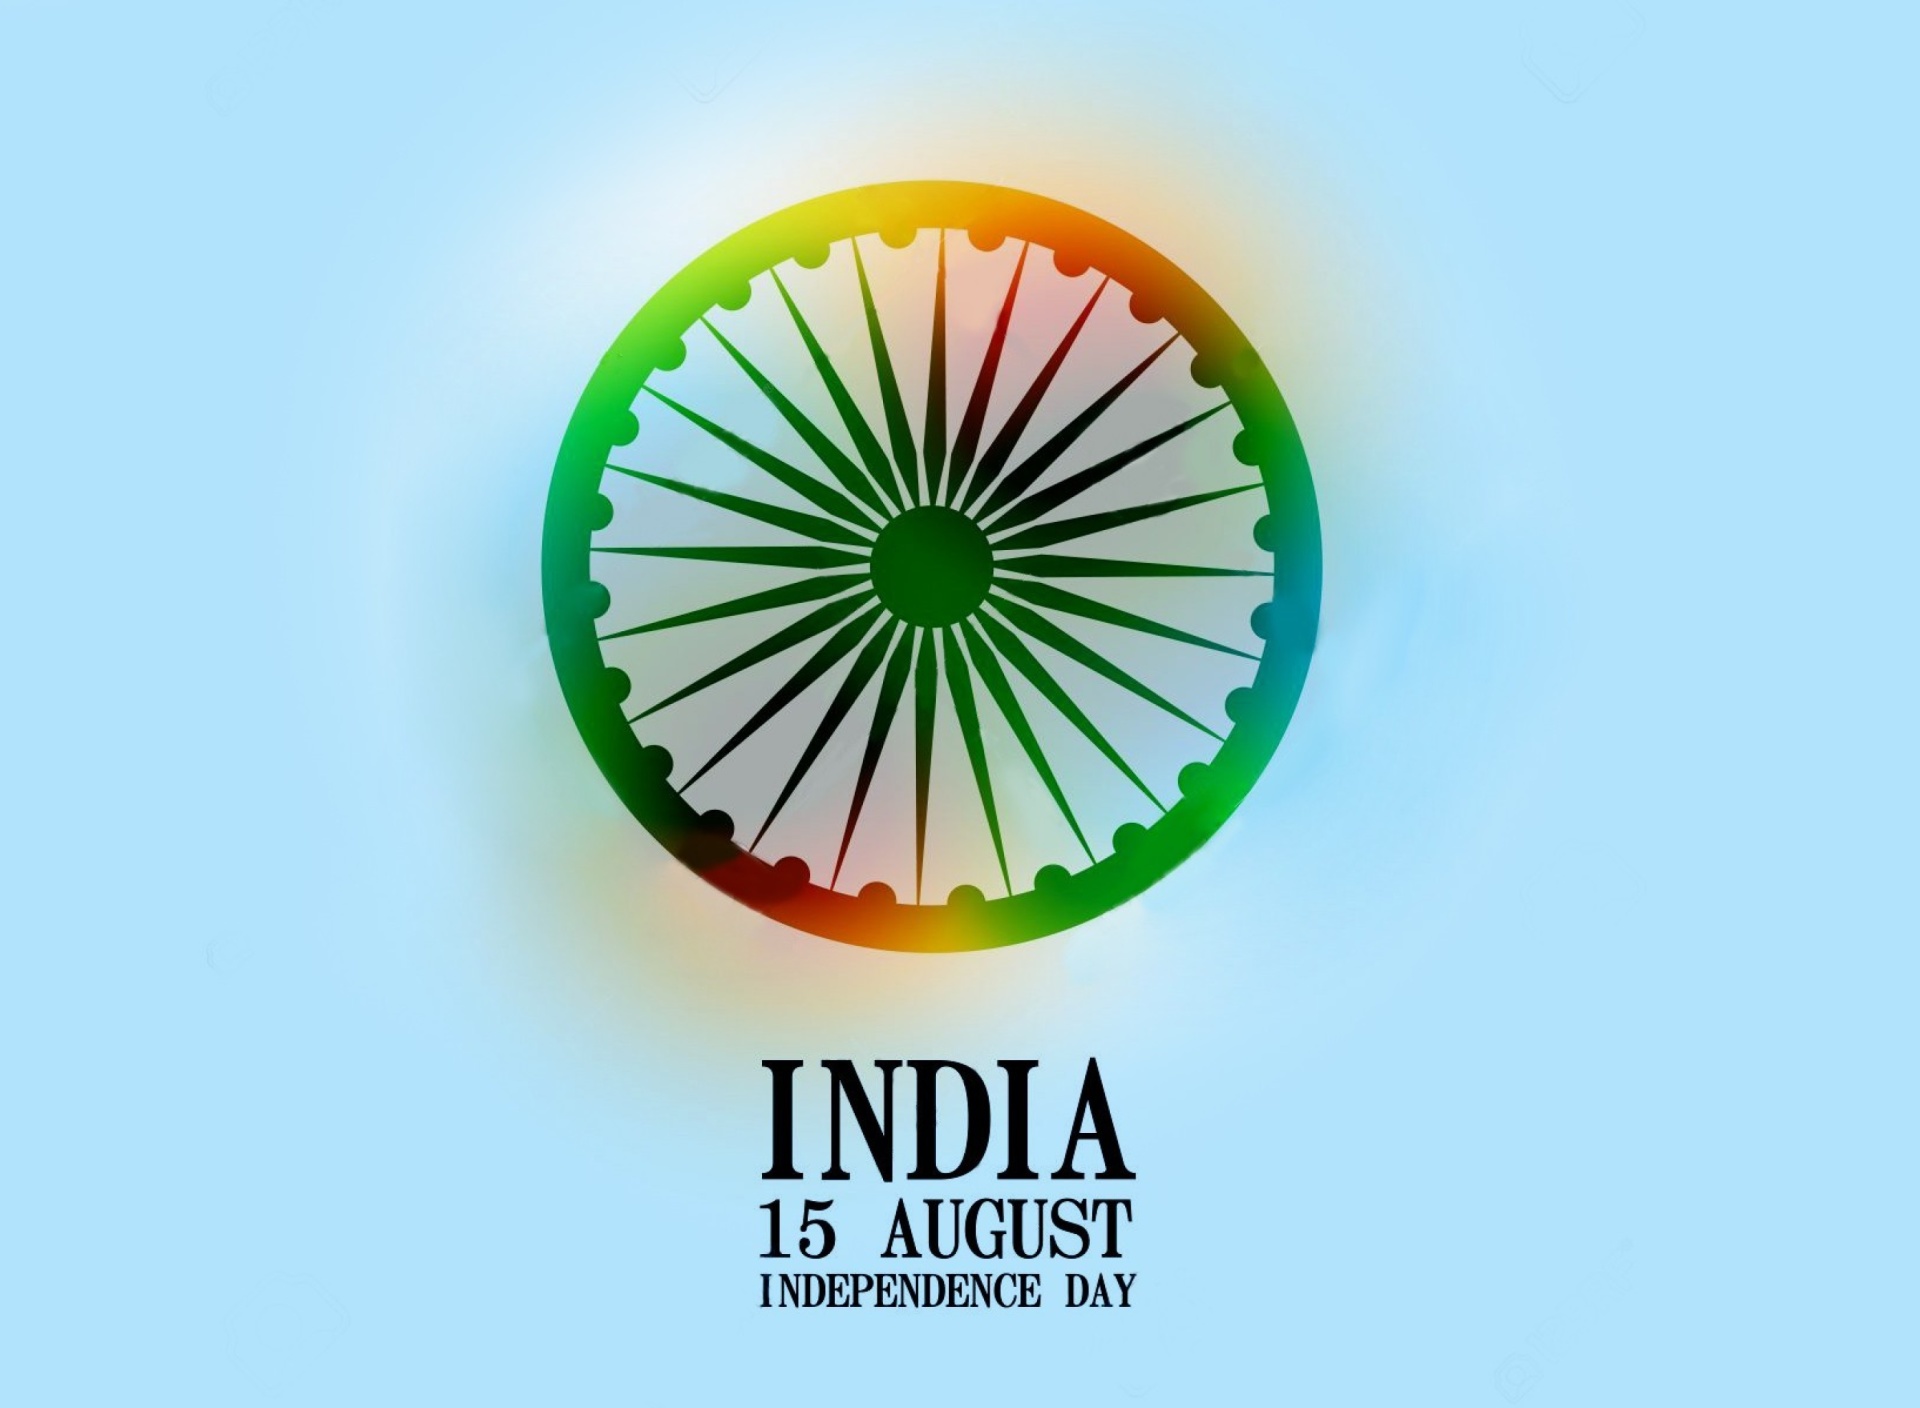 Обои India Independence Day 15 August 1920x1408